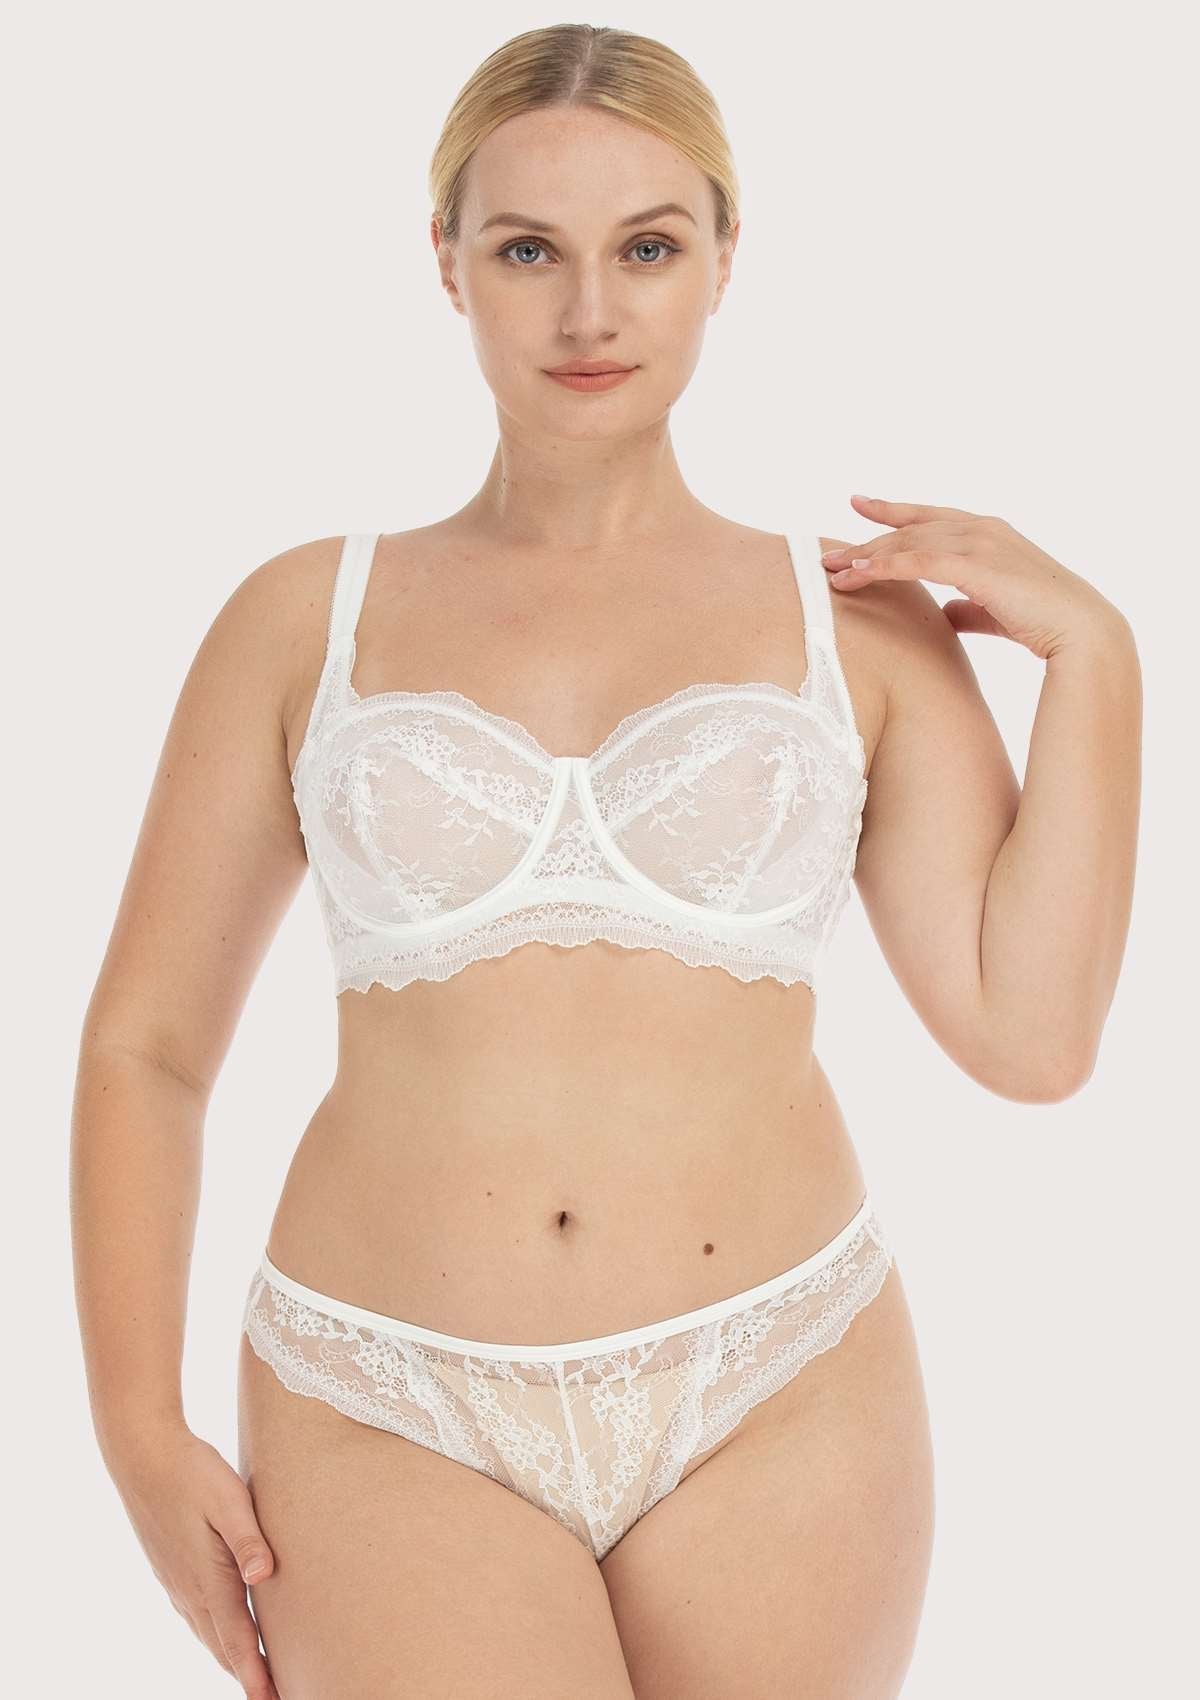 HSIA I Do Floral Lace Bridal Balconette Beautiful Bra For Special Day - White / 40 / C